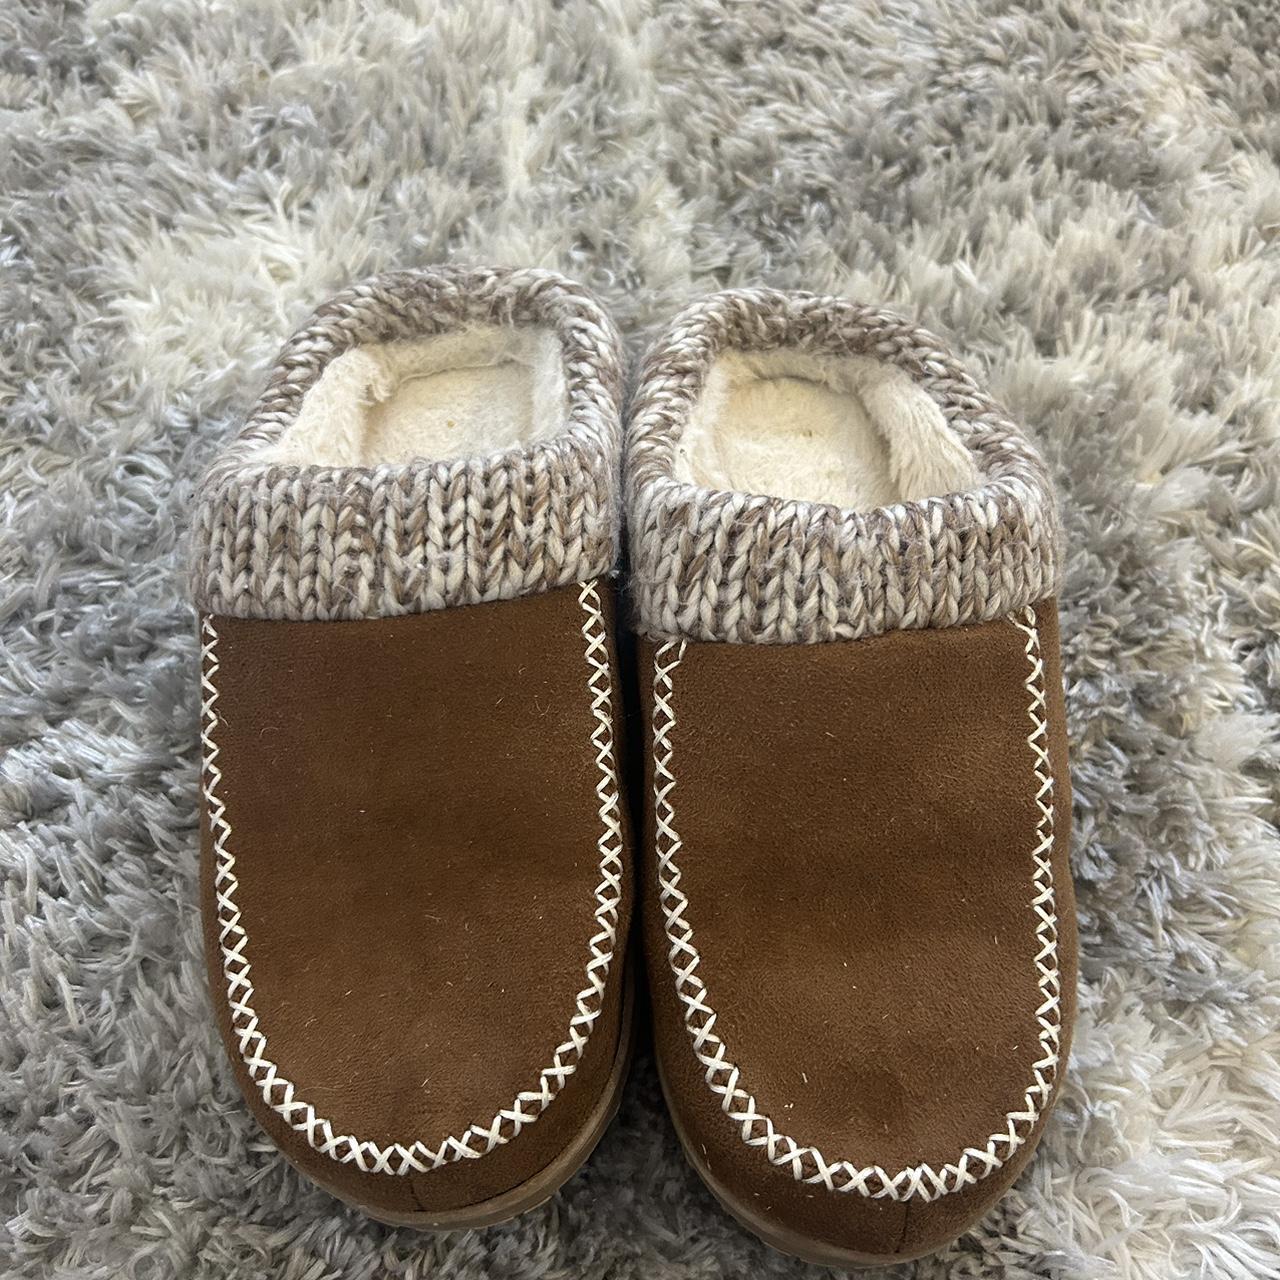 Dearfoams Women's Brown and White Slippers (4)